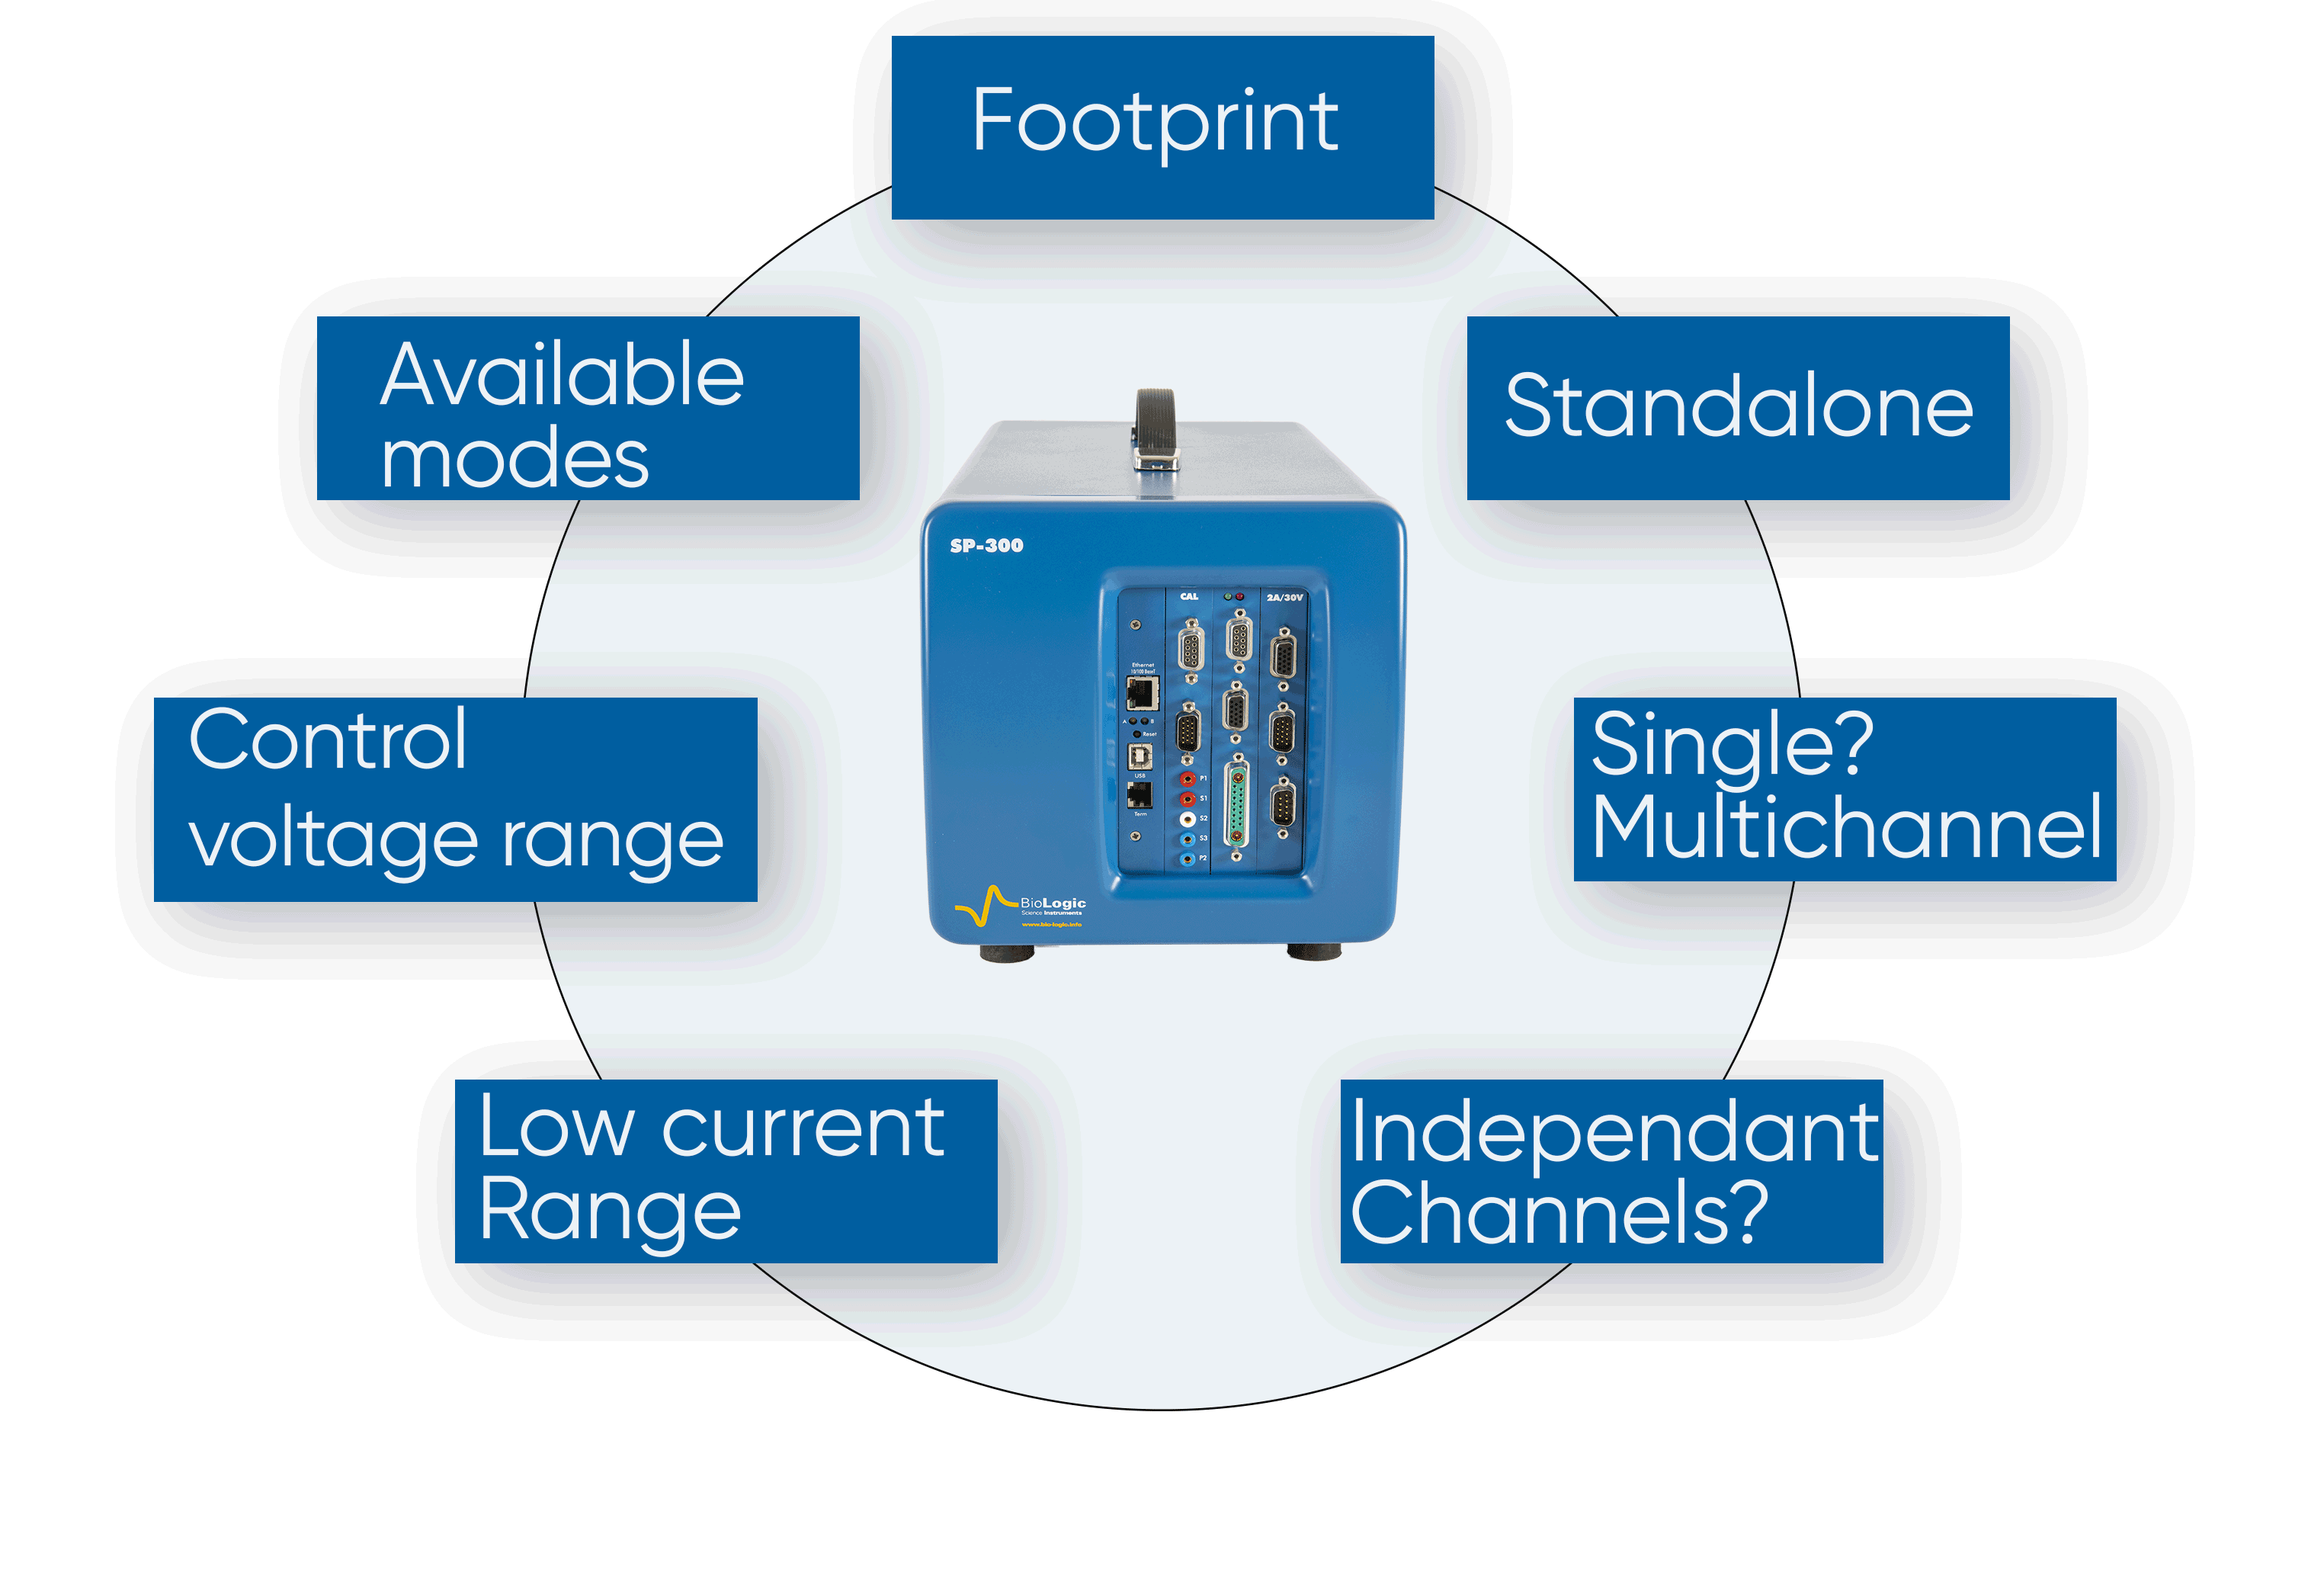 Key factors when considering the potentiostat of a scanning electrochemical workstation are illustrated.